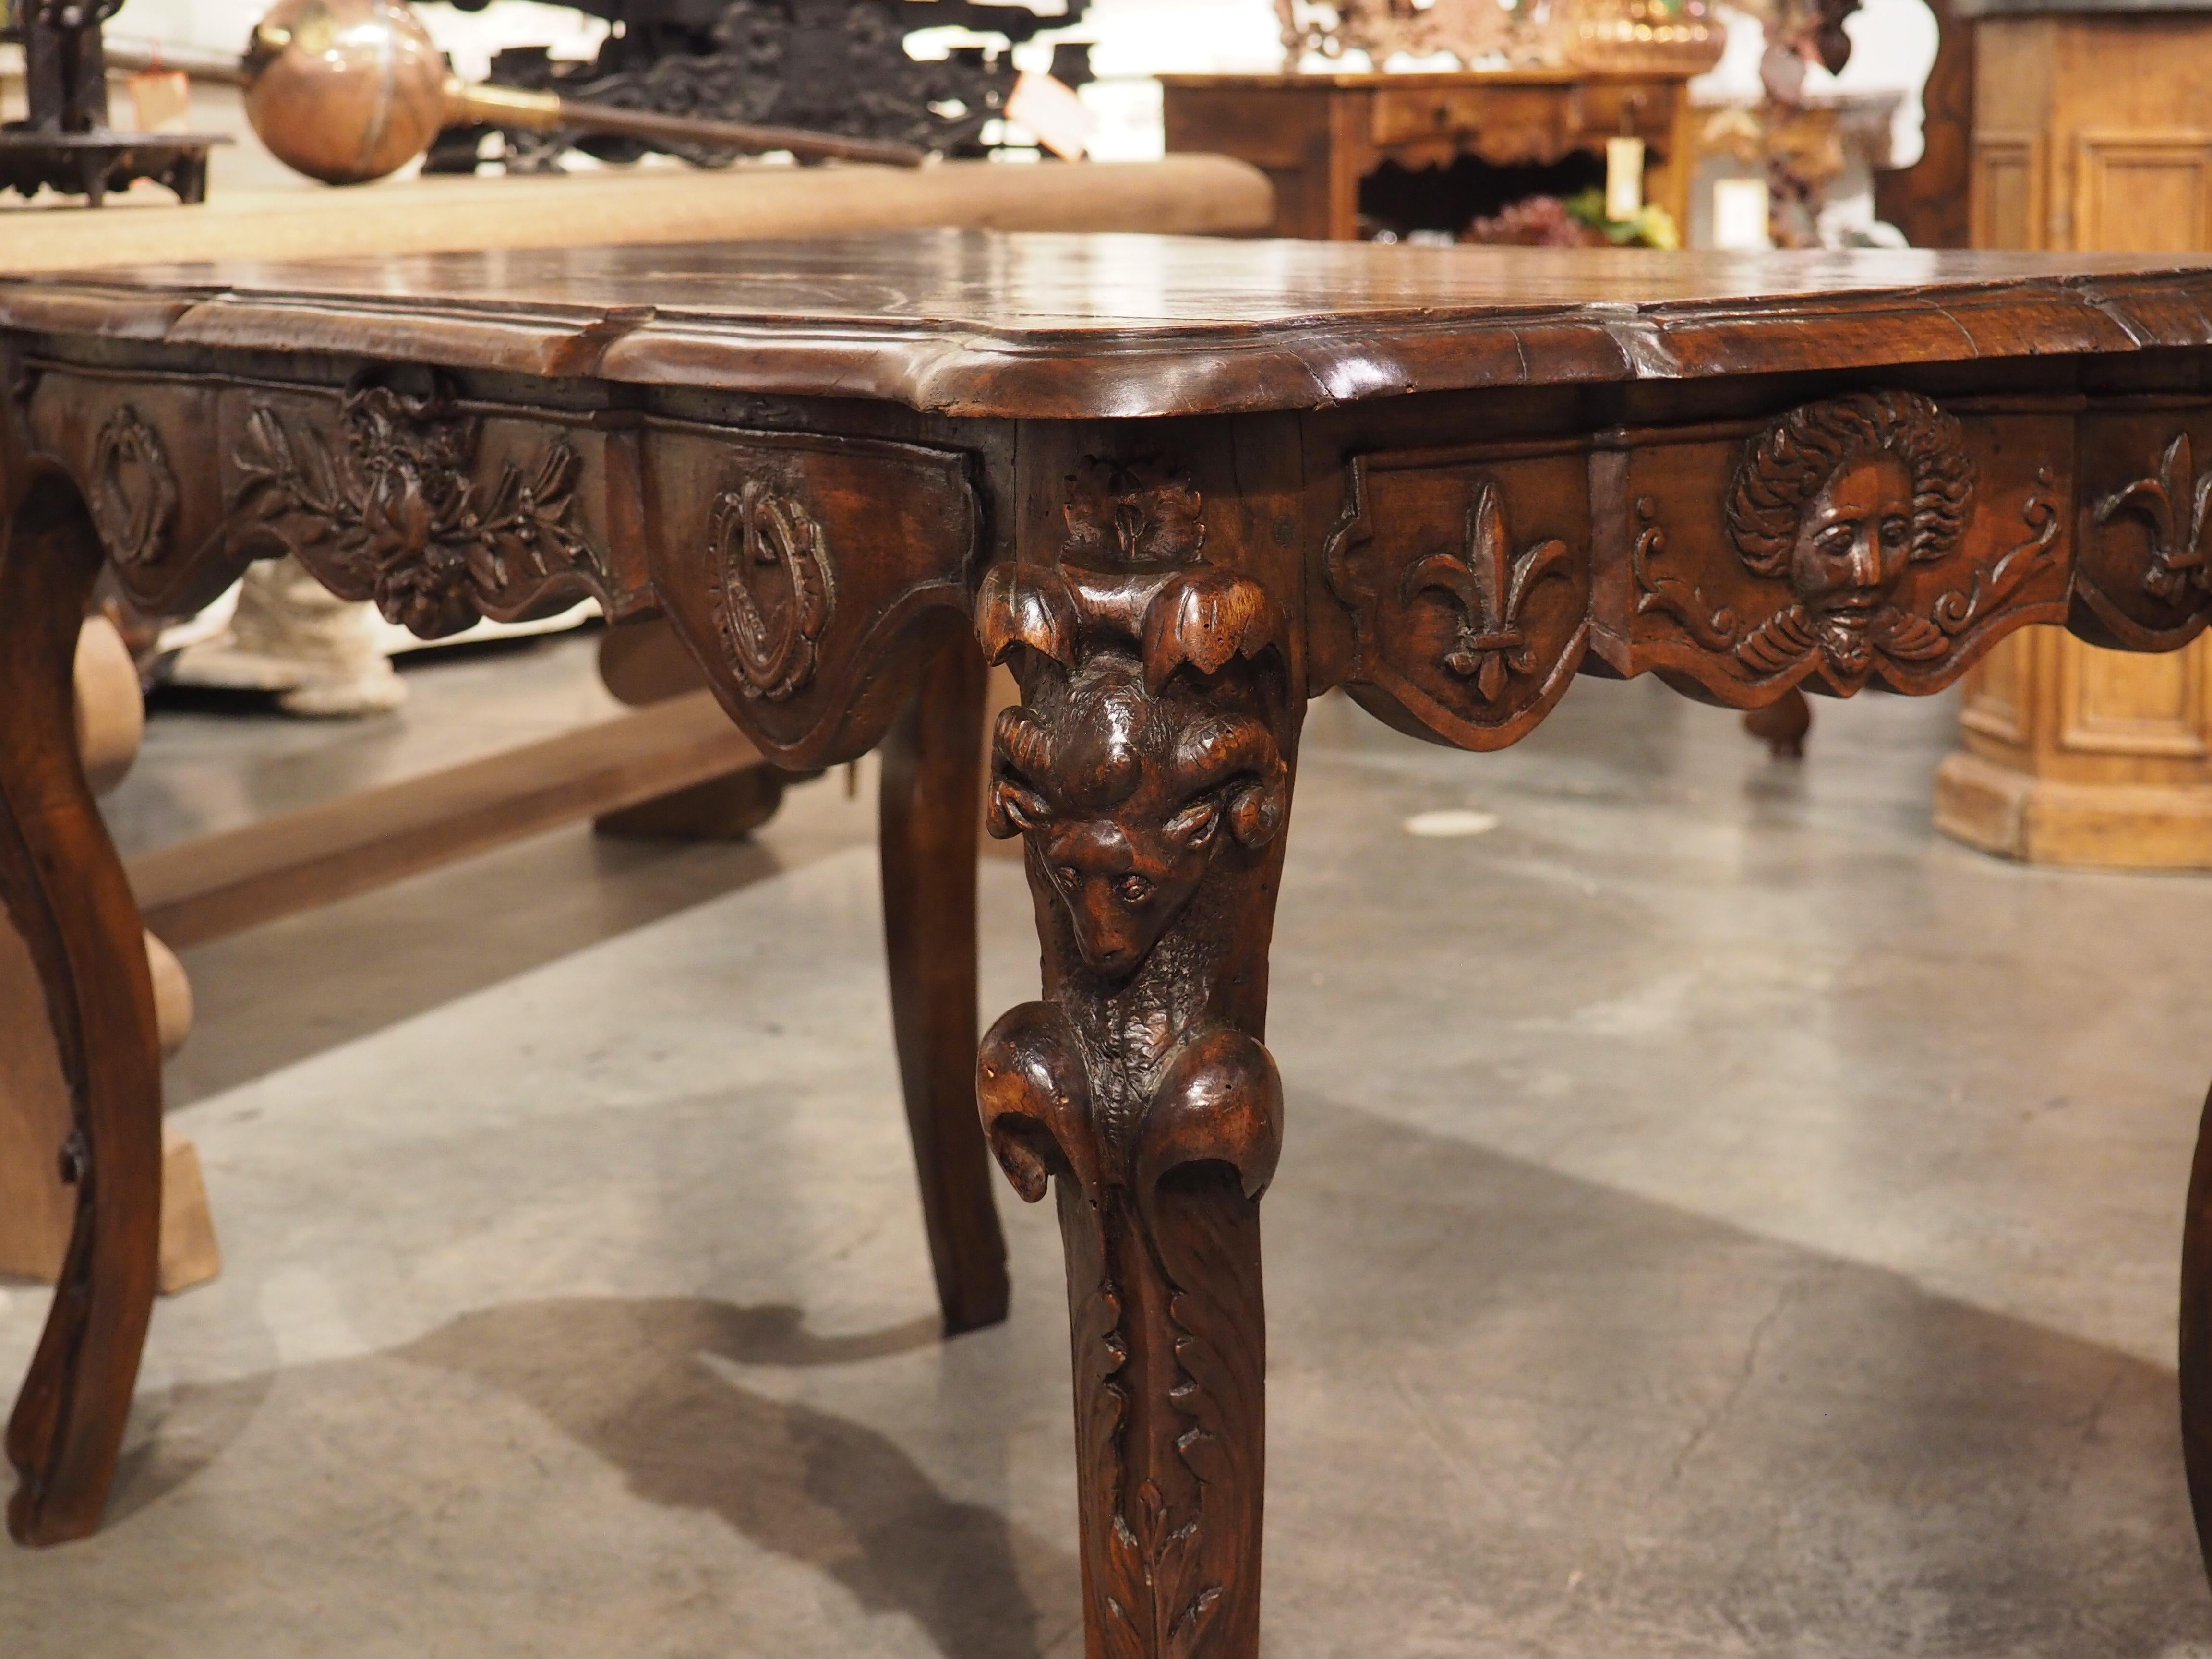 Circa 1870 French Walnut Wood Center Table with Rams' Heads and Fleur De Lys For Sale 12